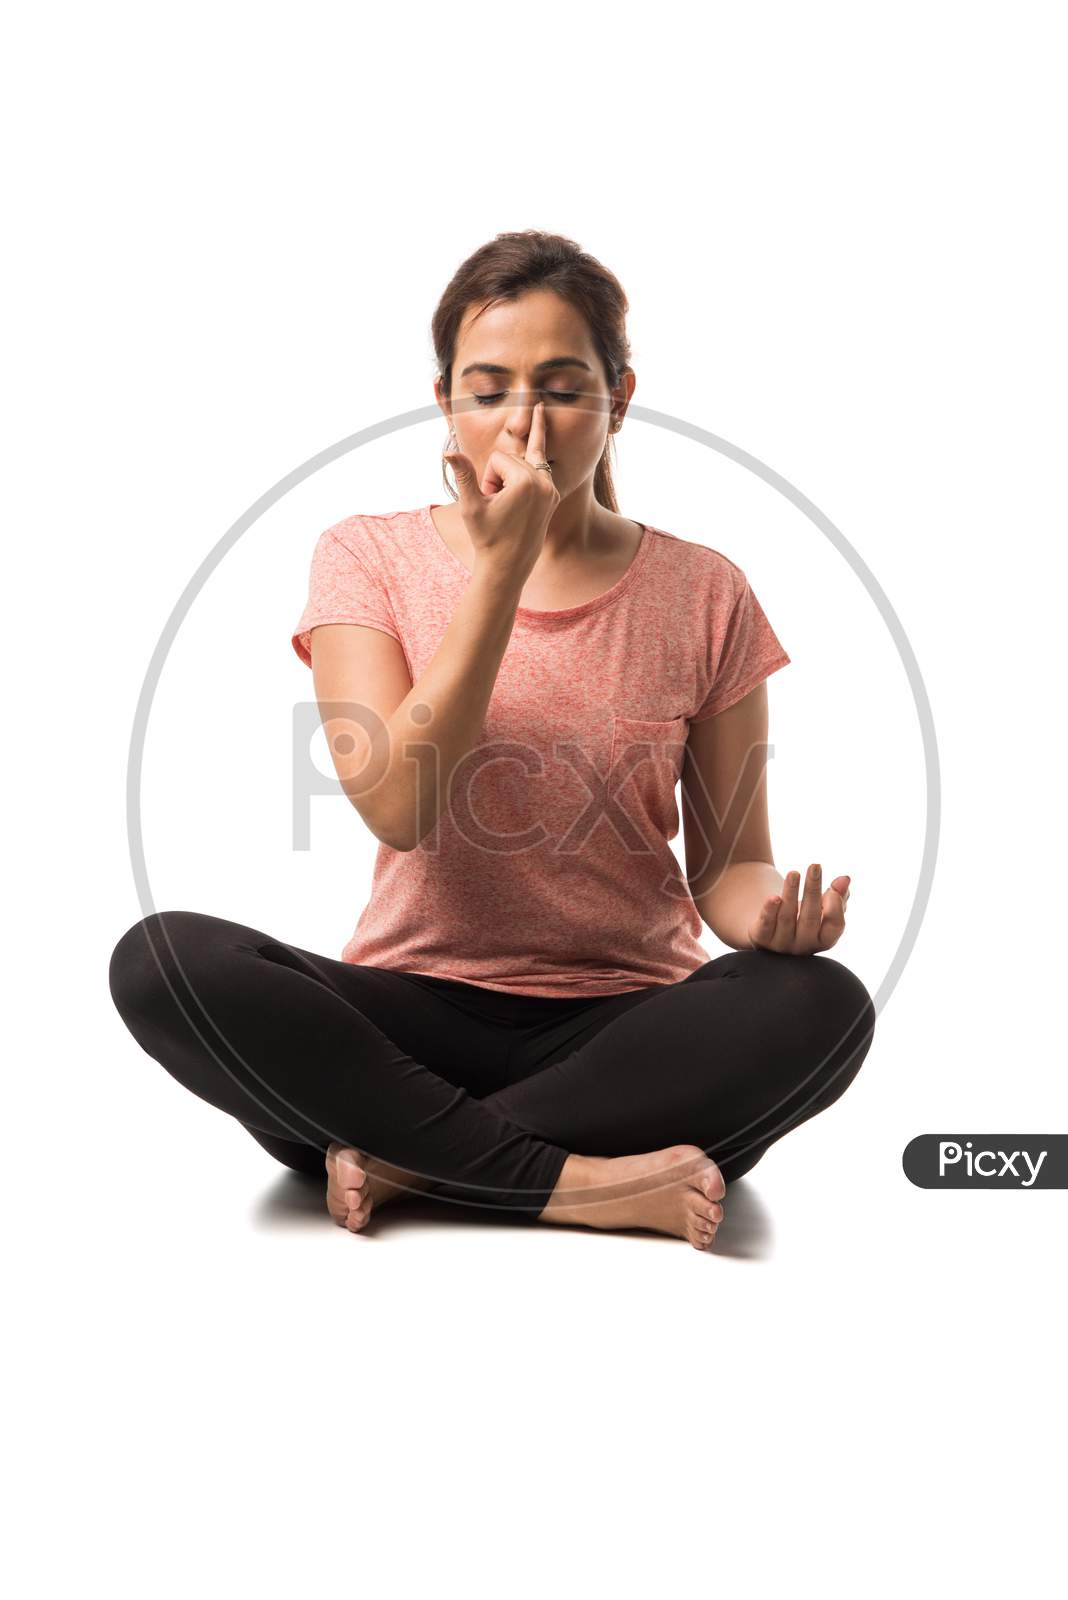 Indian Woman / Girl performing Yoga asana or meditation or dhyan, sitting isolated over white background